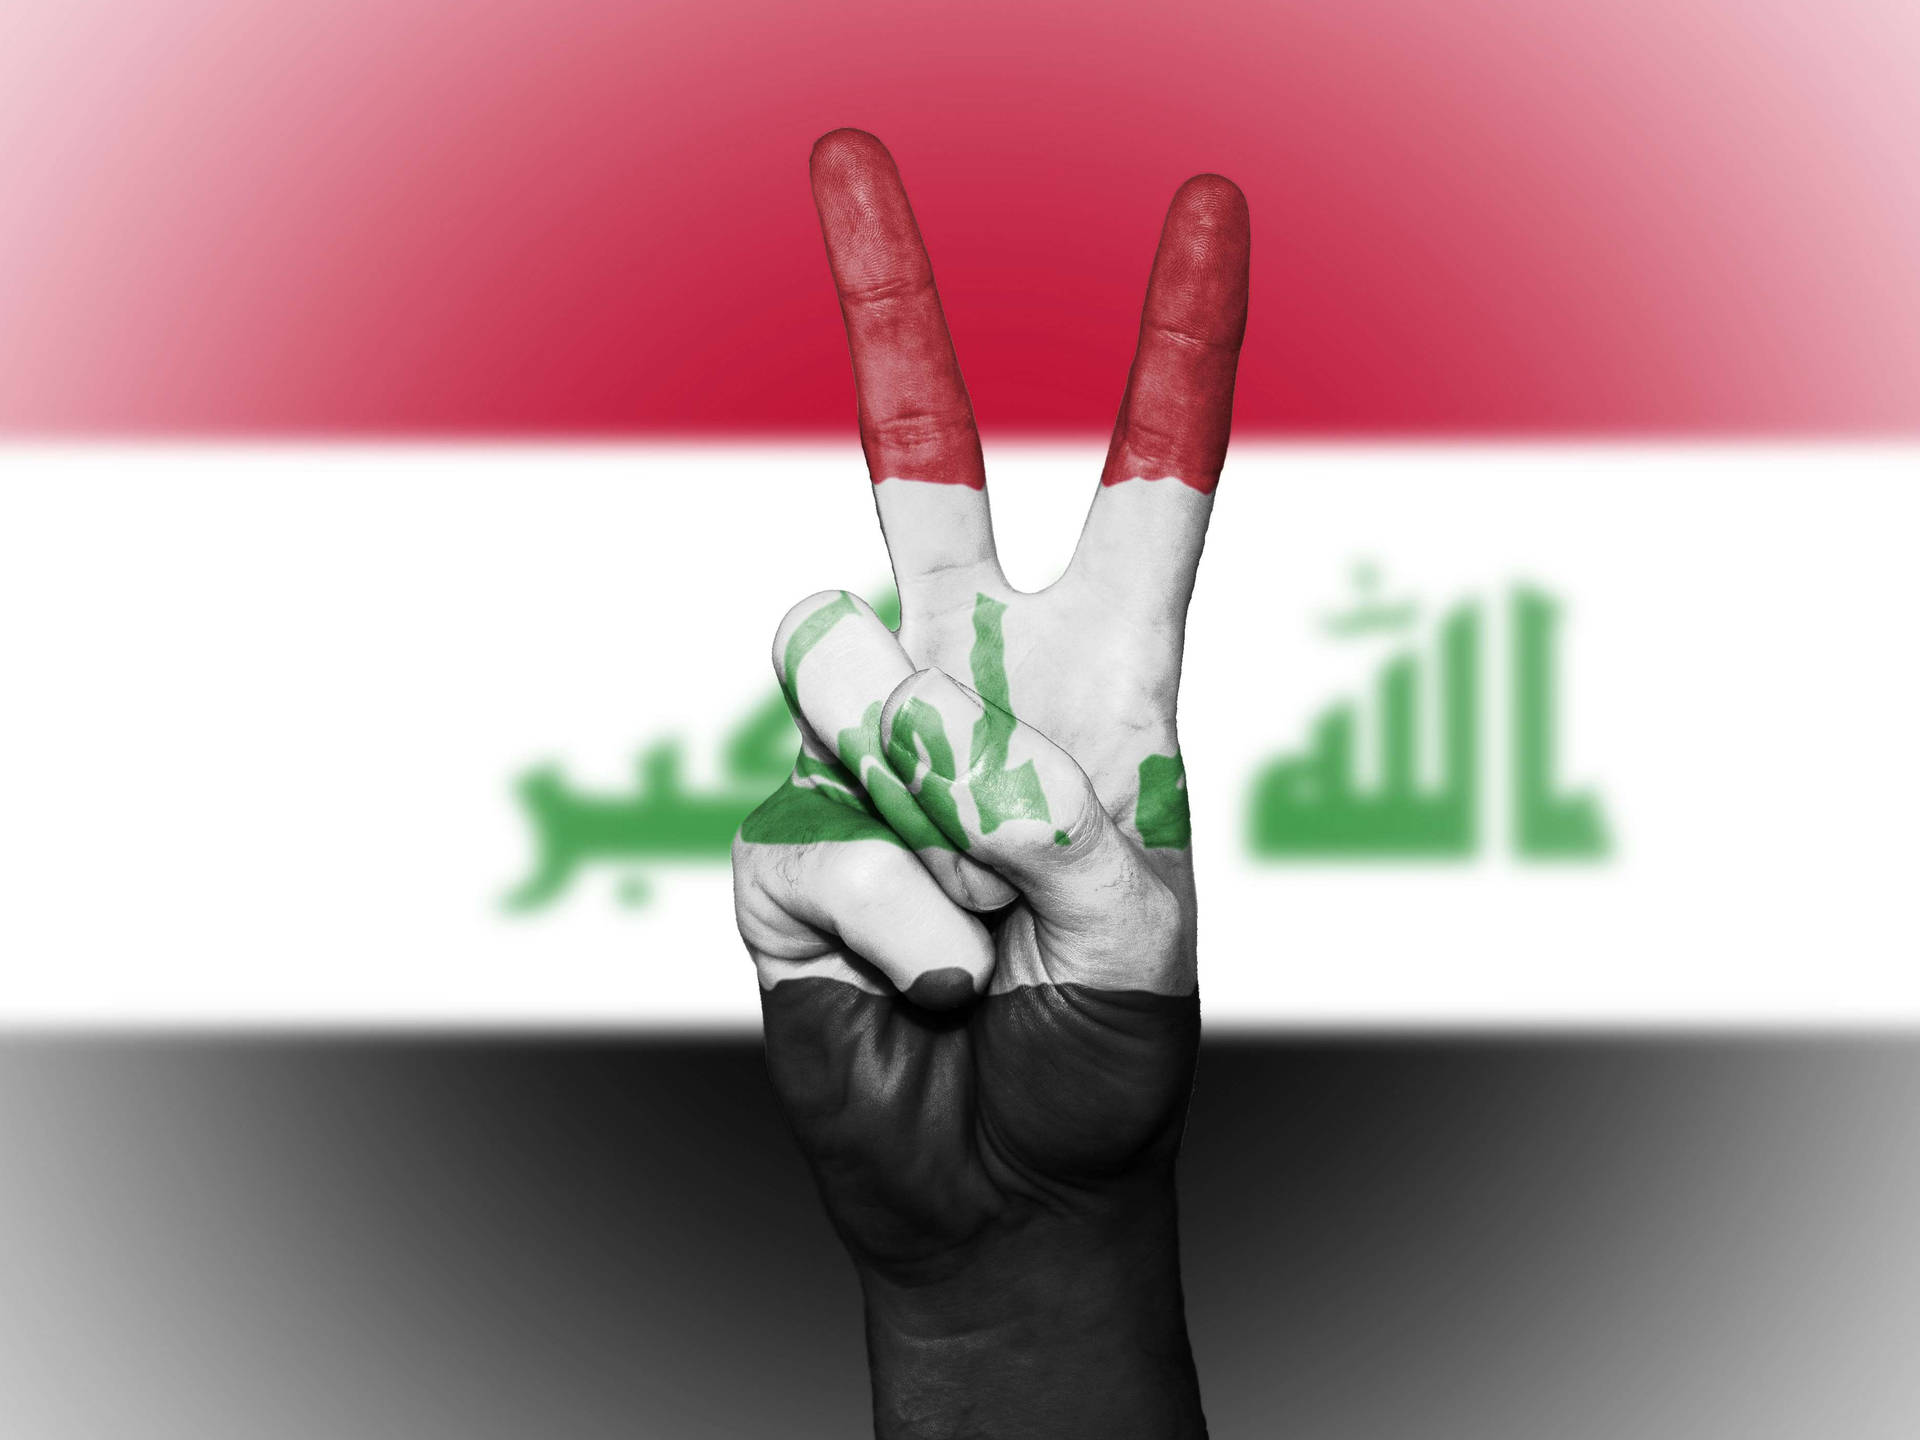 The Peaceful Power of Iraq - A hand symbolizing peace covered with an Iraqi flag. Wallpaper